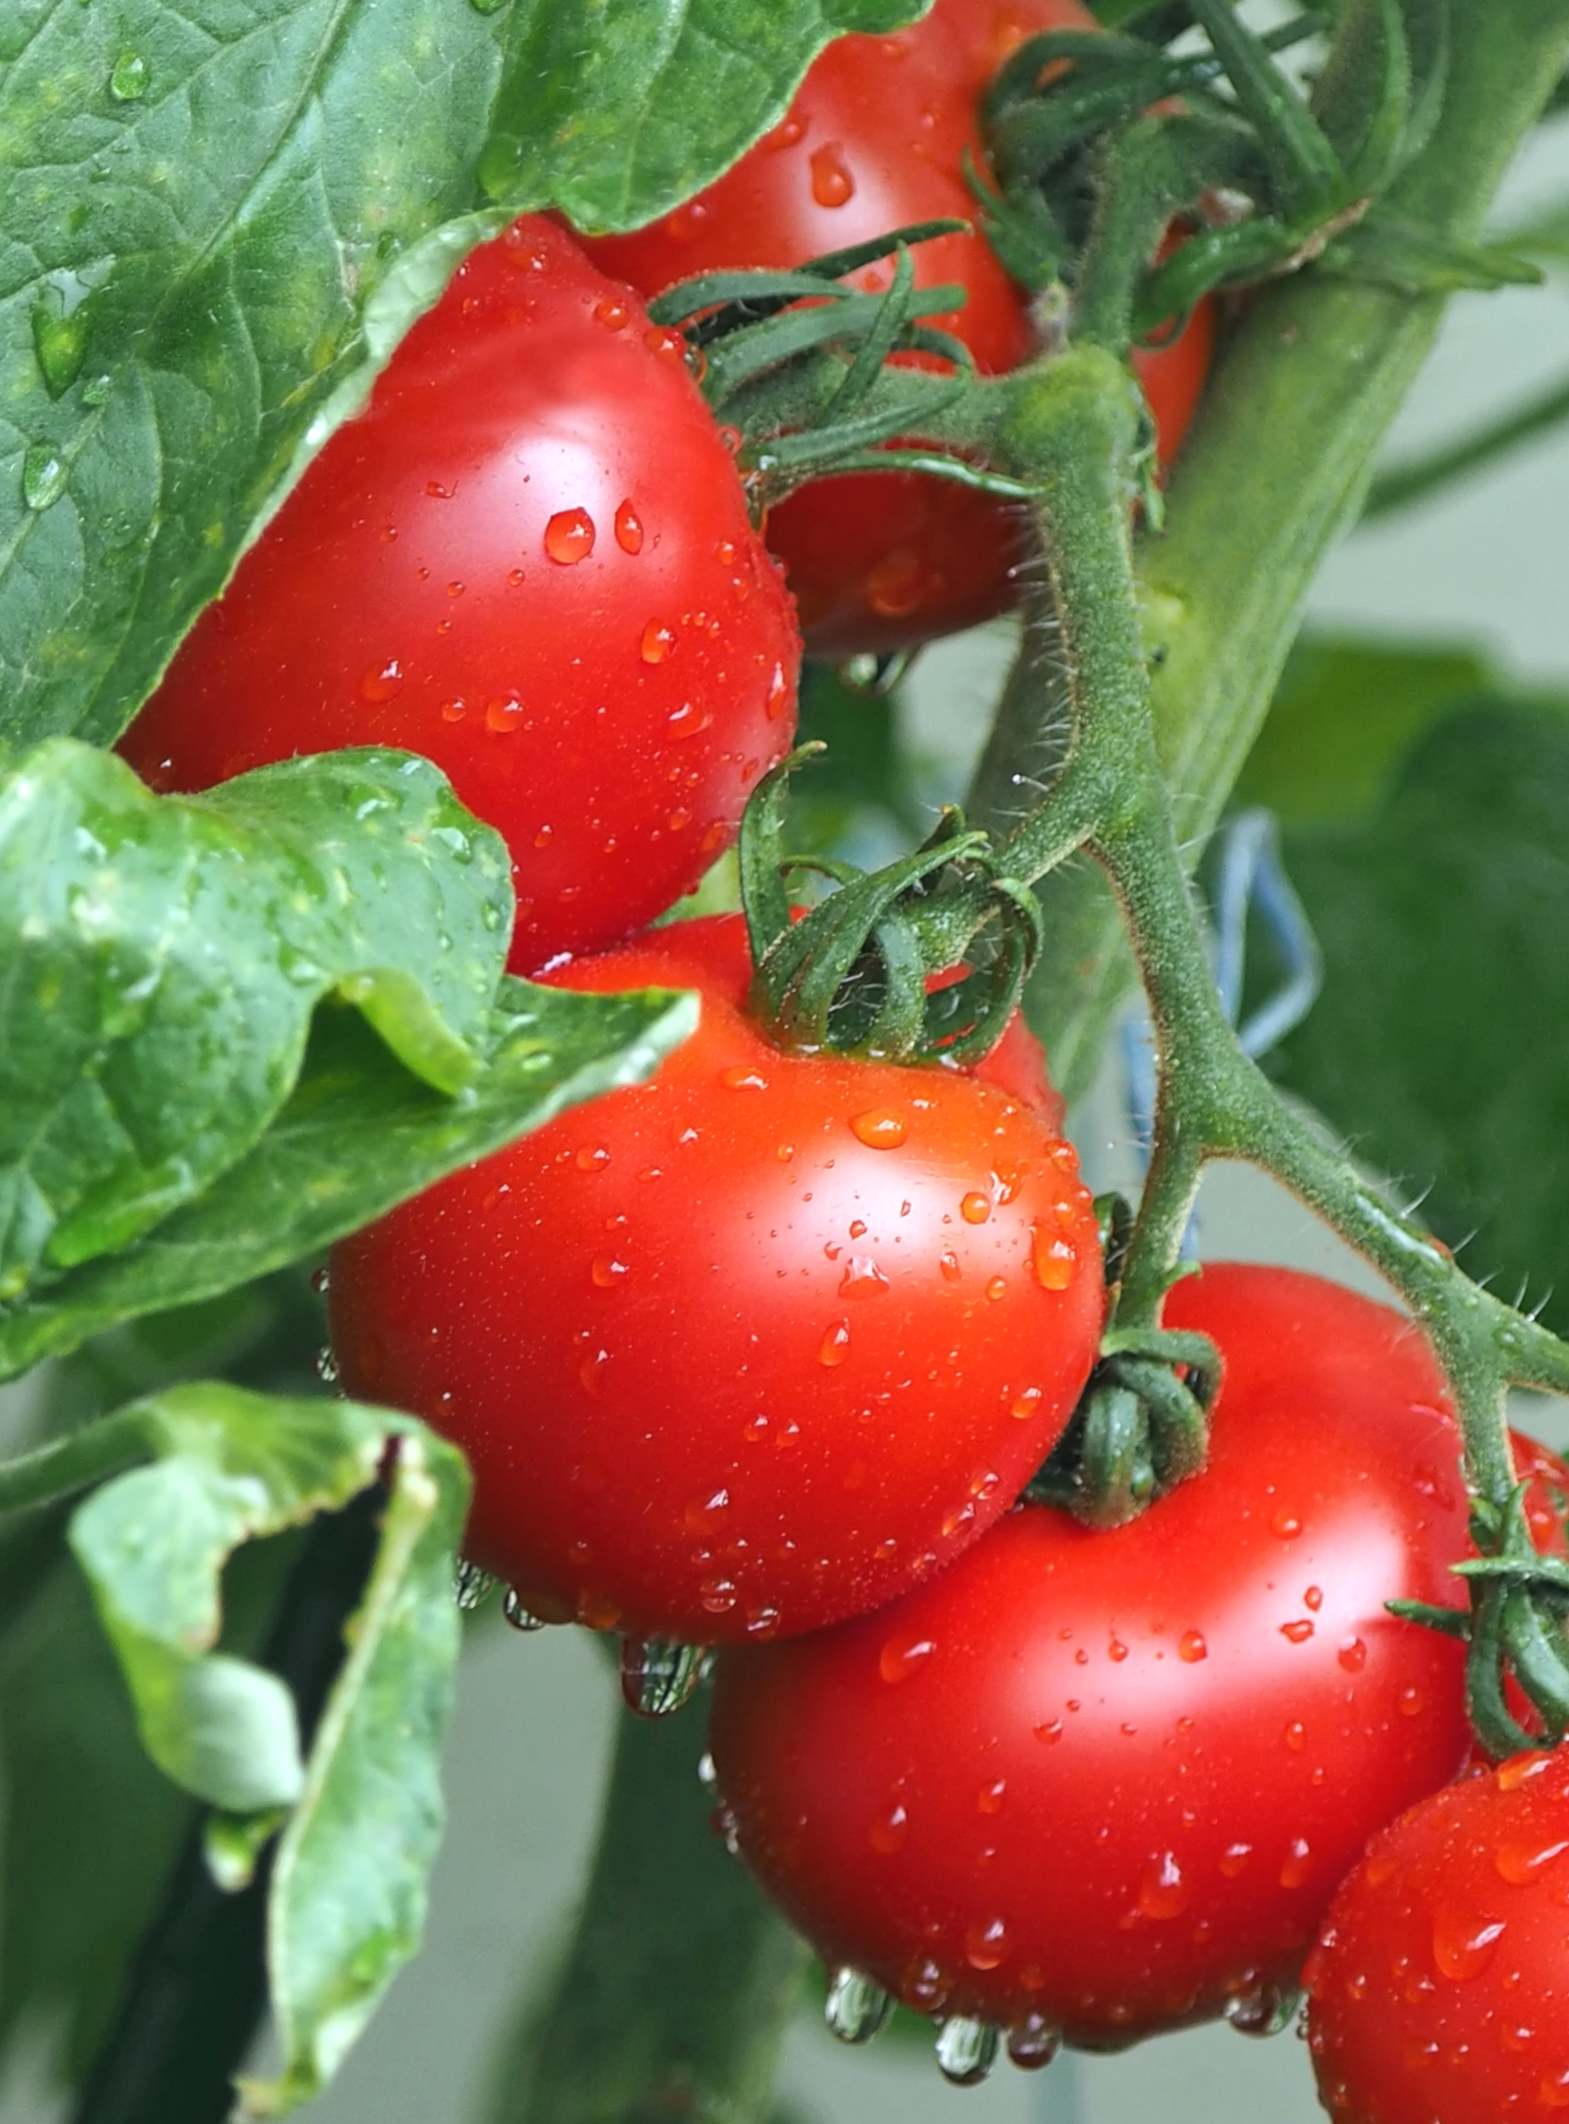 Tomato Sowing Growing And Harvesting Tomatoes Video,Tequila Drinks Brands